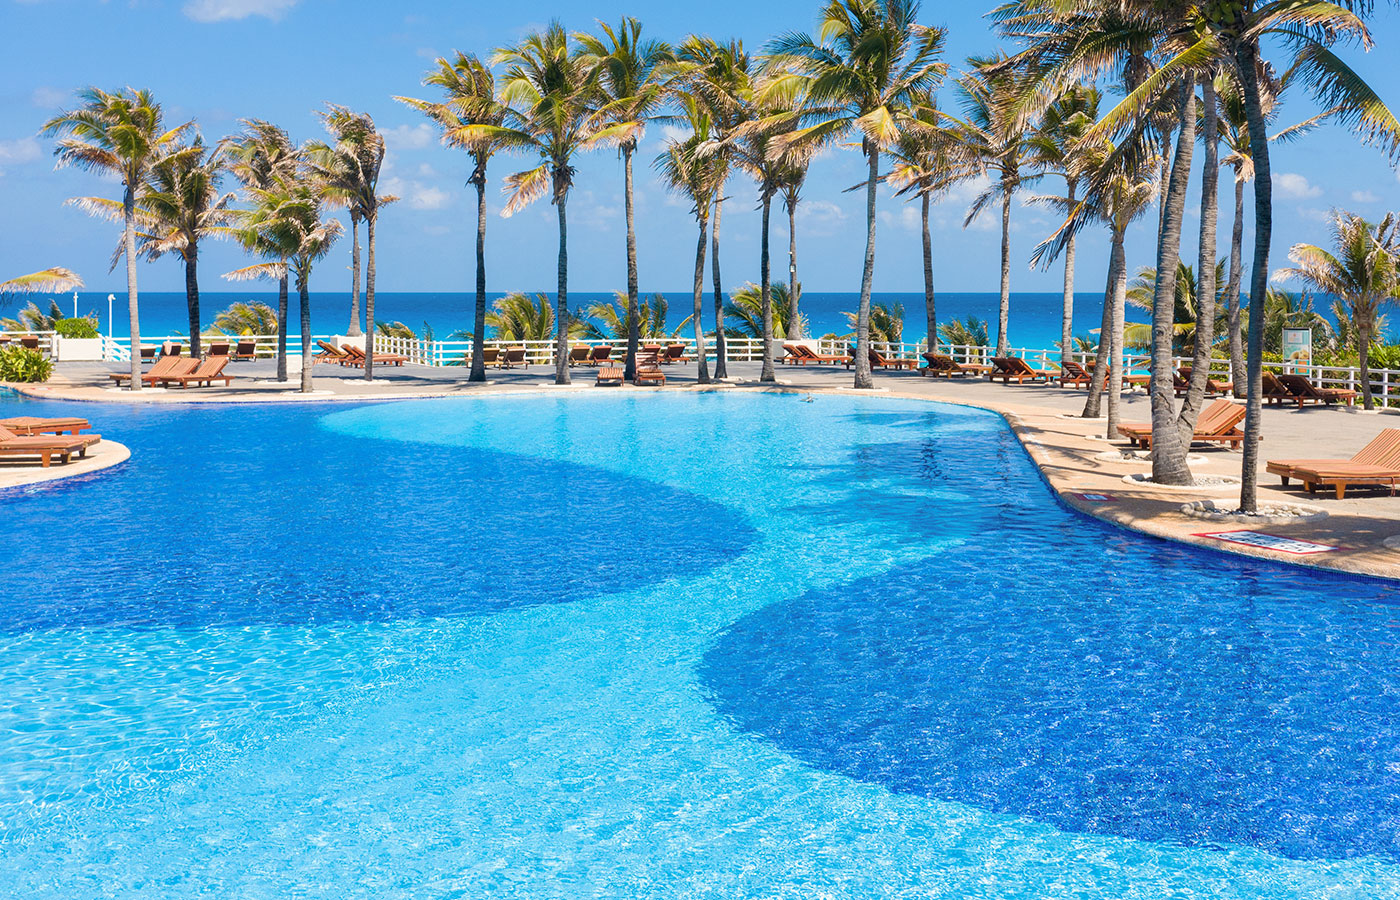 Swimming pools next to a palm tree restaurant at the Grand Oasis Cancun Hotel